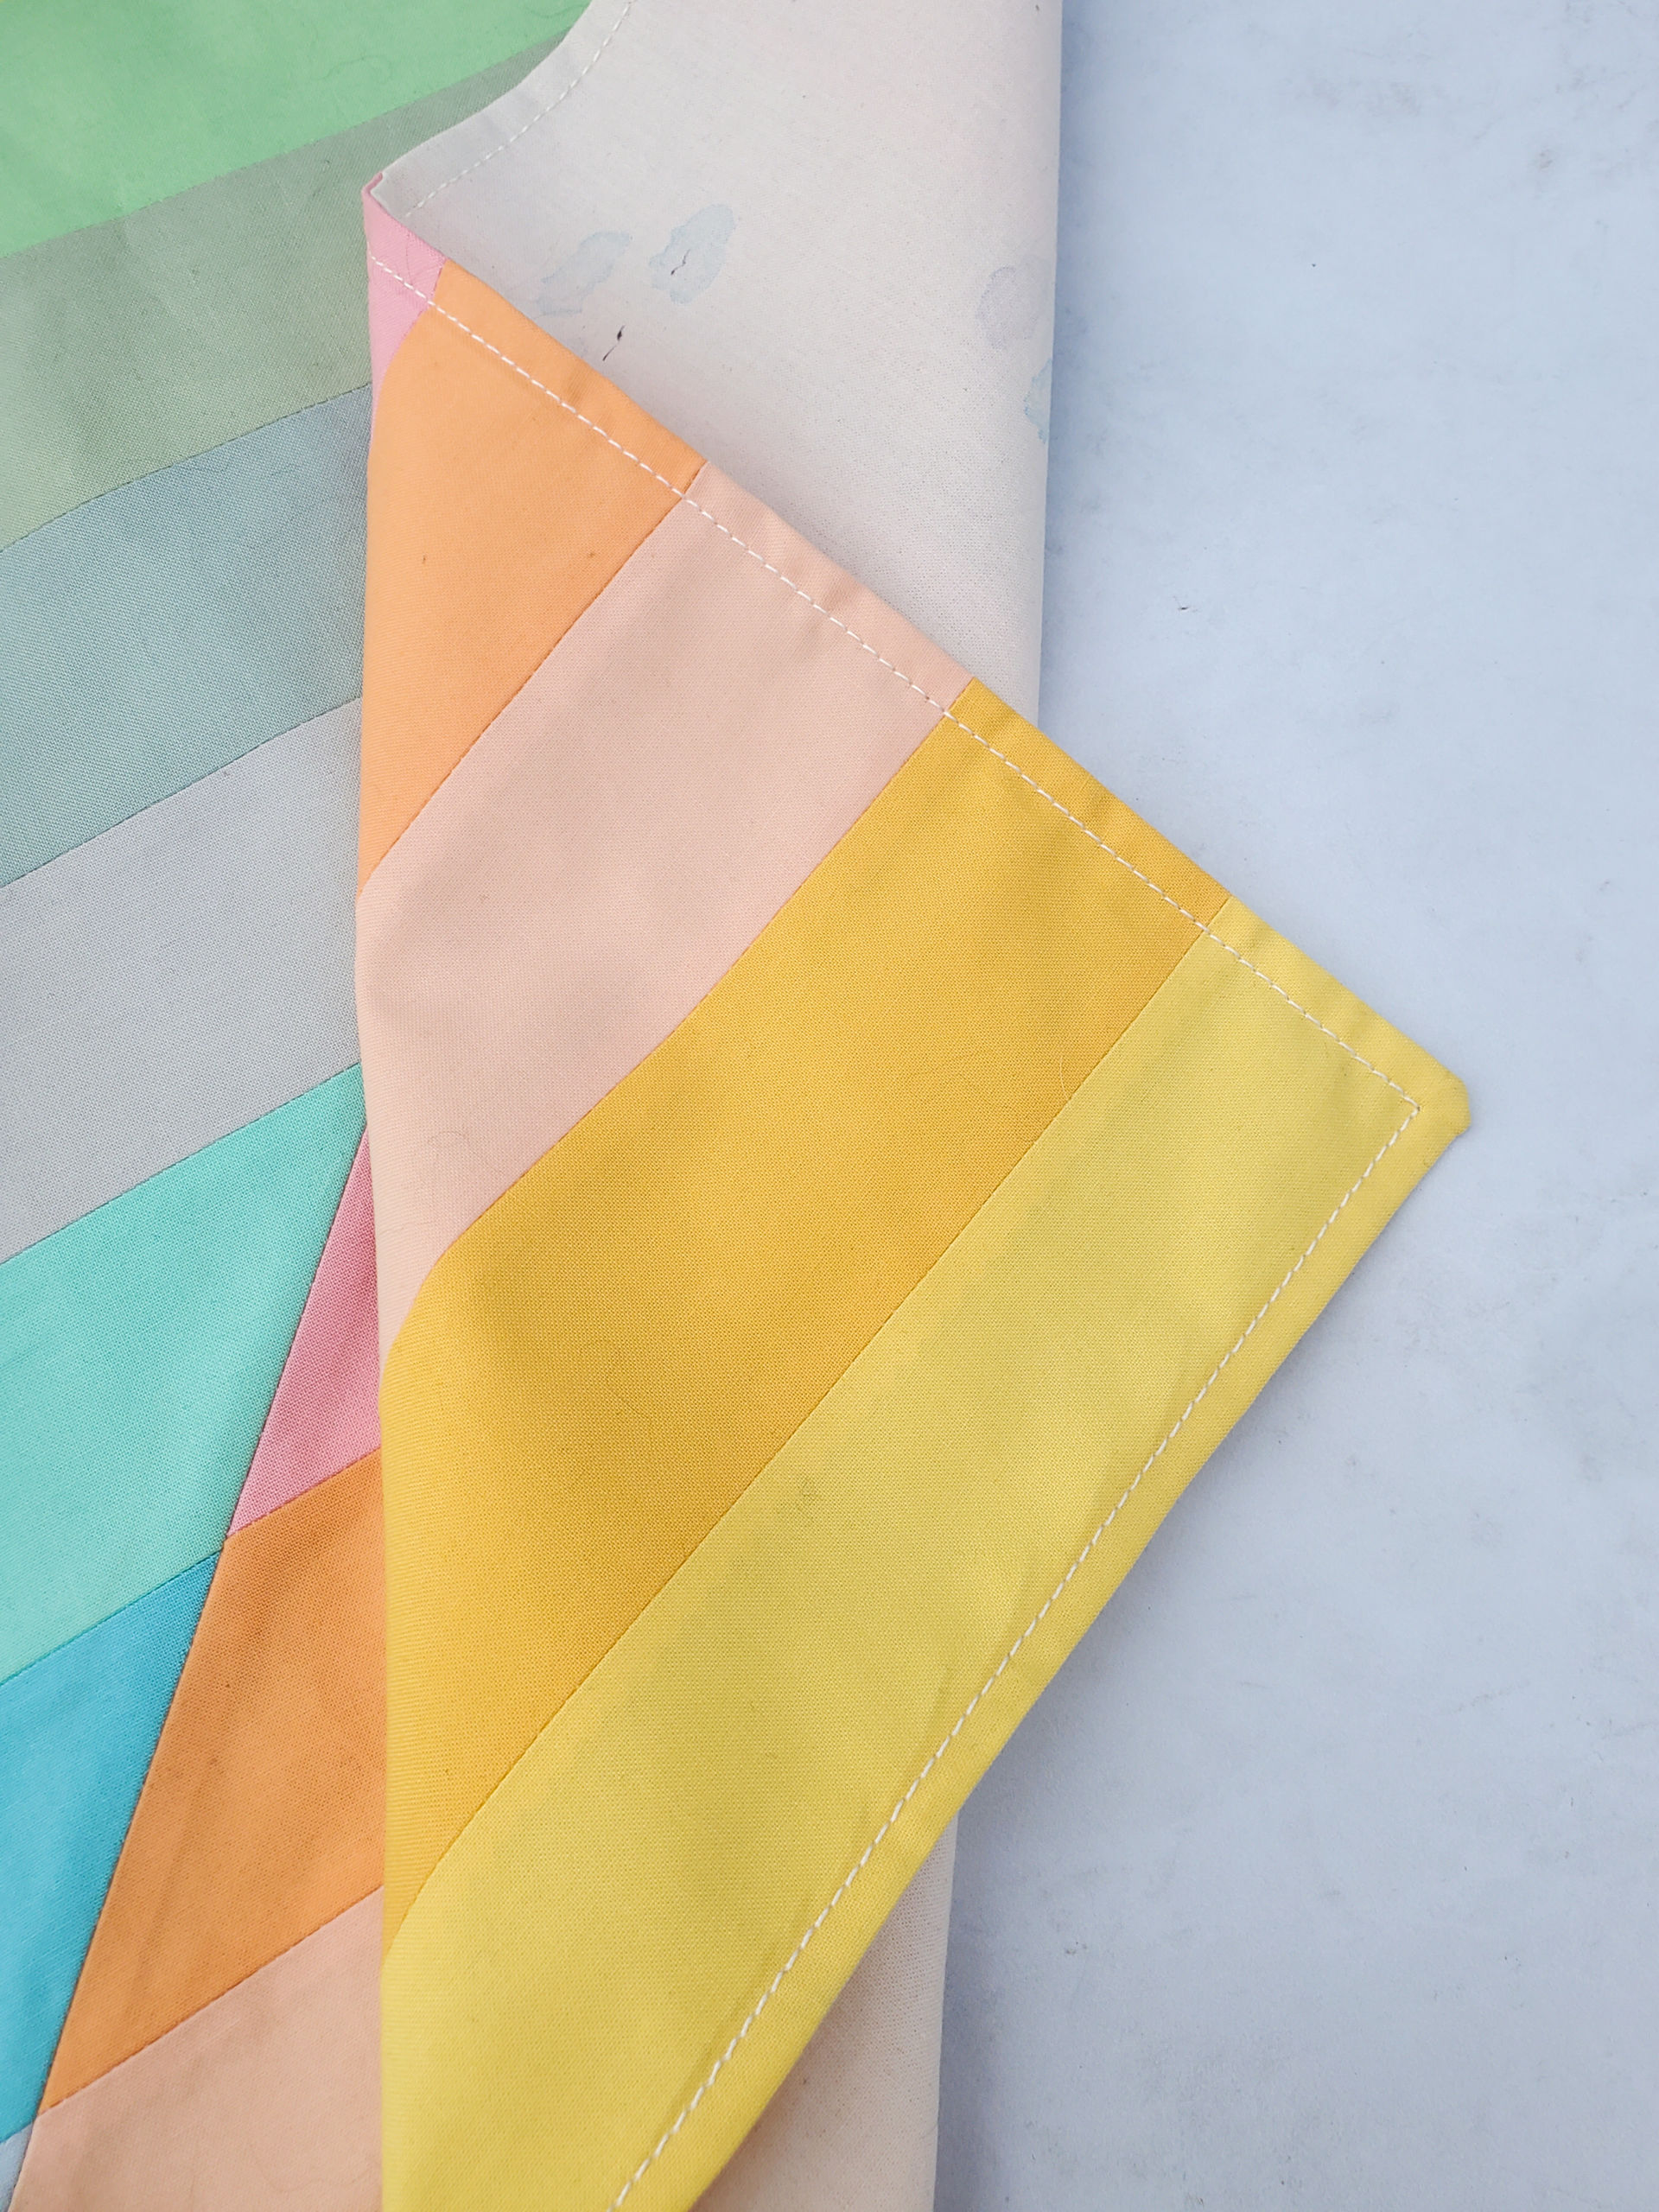 How to make a patchwork bandana with the leftover scraps from the Adventureland quilt pattern. This bandana tutorial is fast and easy! suzyquilts.com #bandana #sewingtutorial